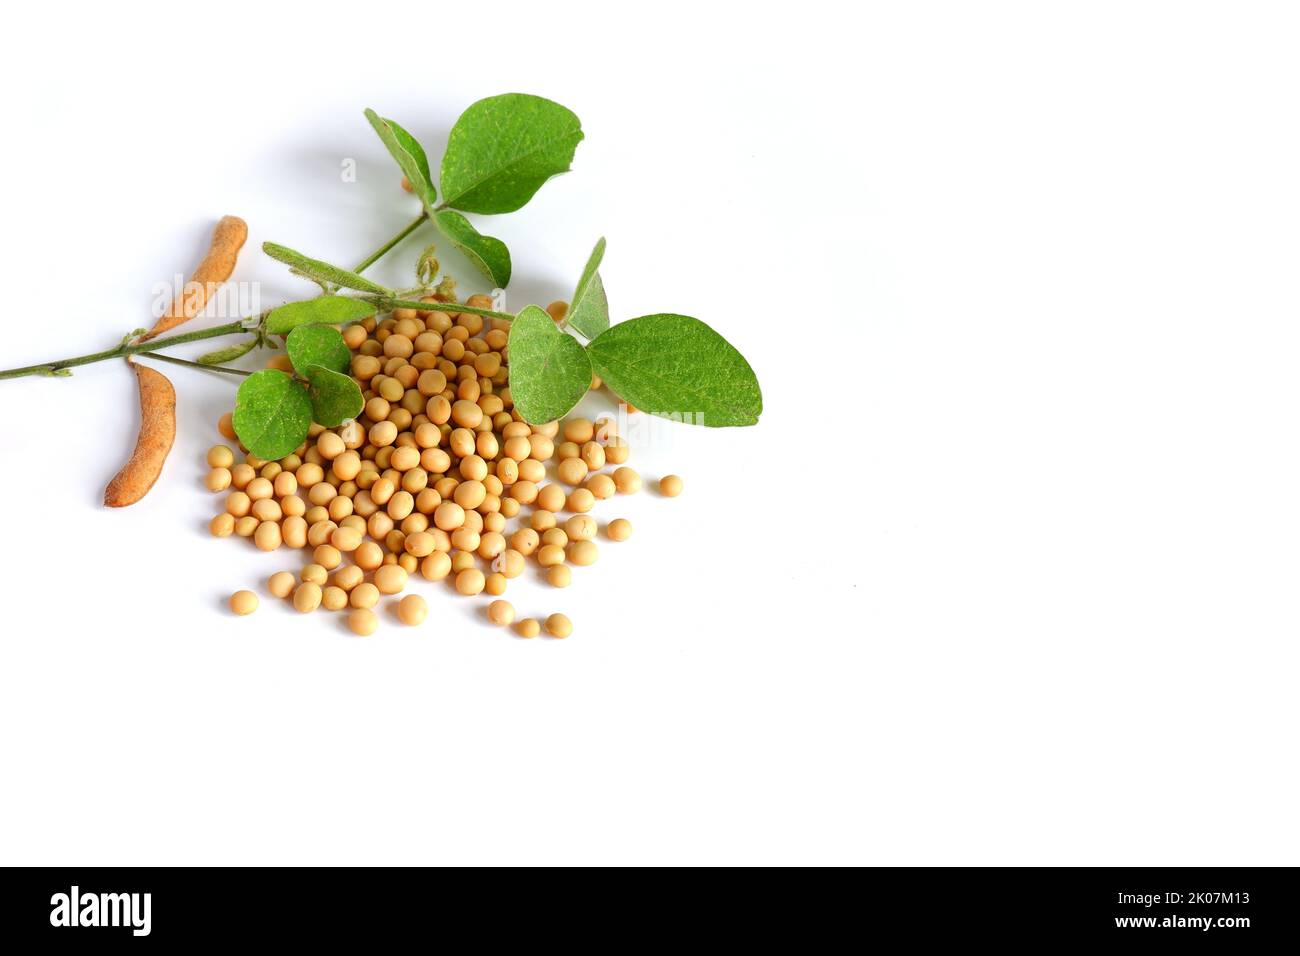 Glycine max. Soy. A fresh green plant with a stem, leaves, pods, beans and ripe grains Stock Photo